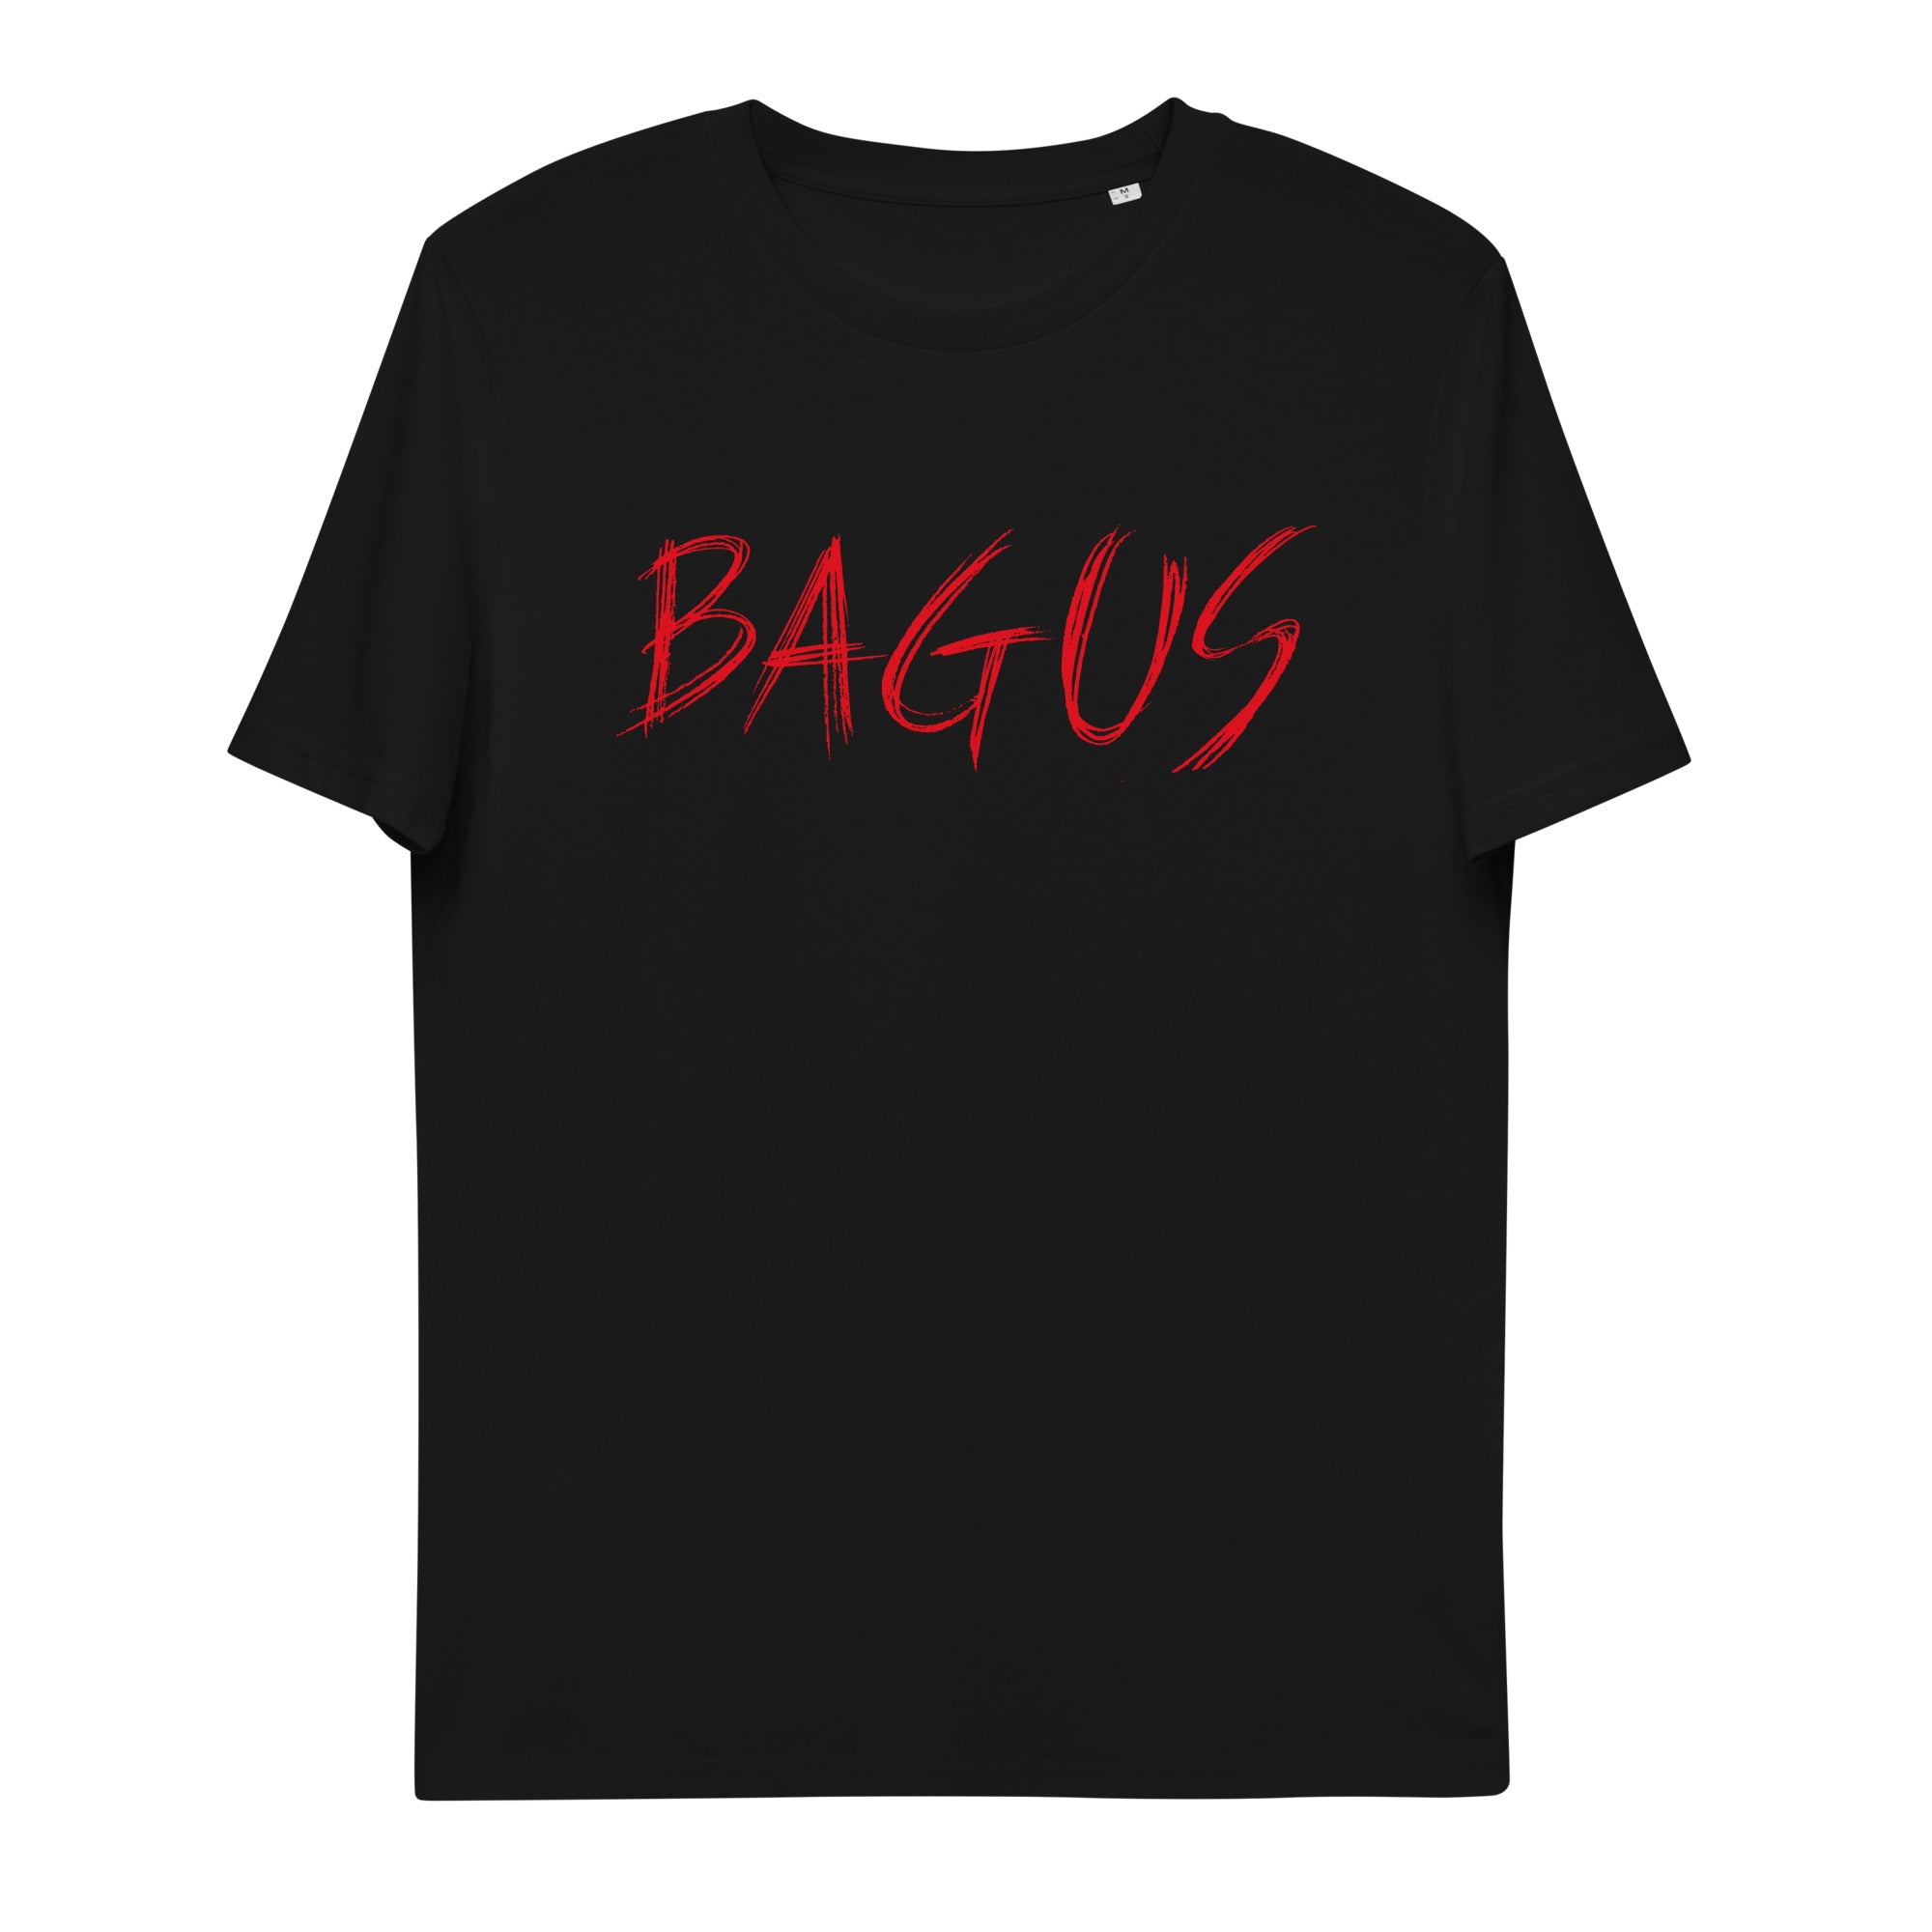 Bagus Sustainable T-shirt